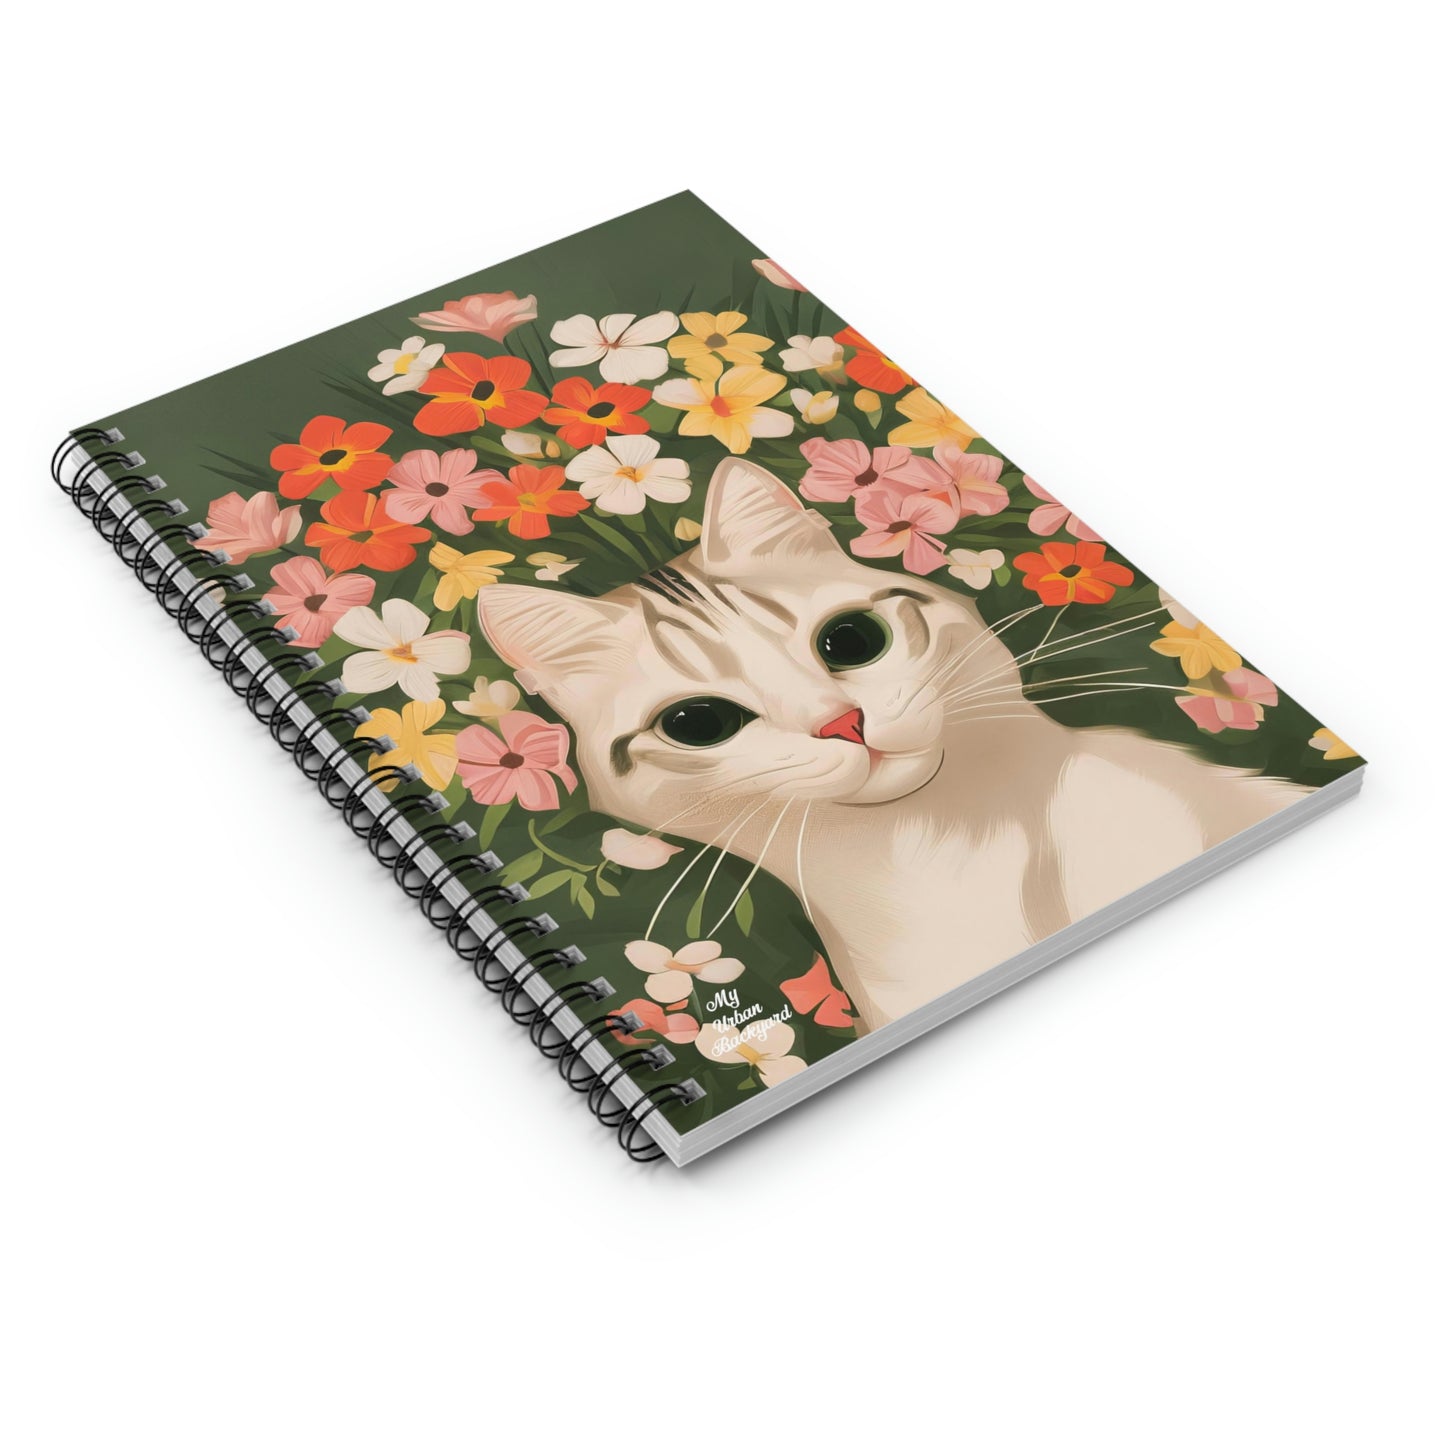 White Cat and Flowers, Spiral Notebook Journal - Write in Style